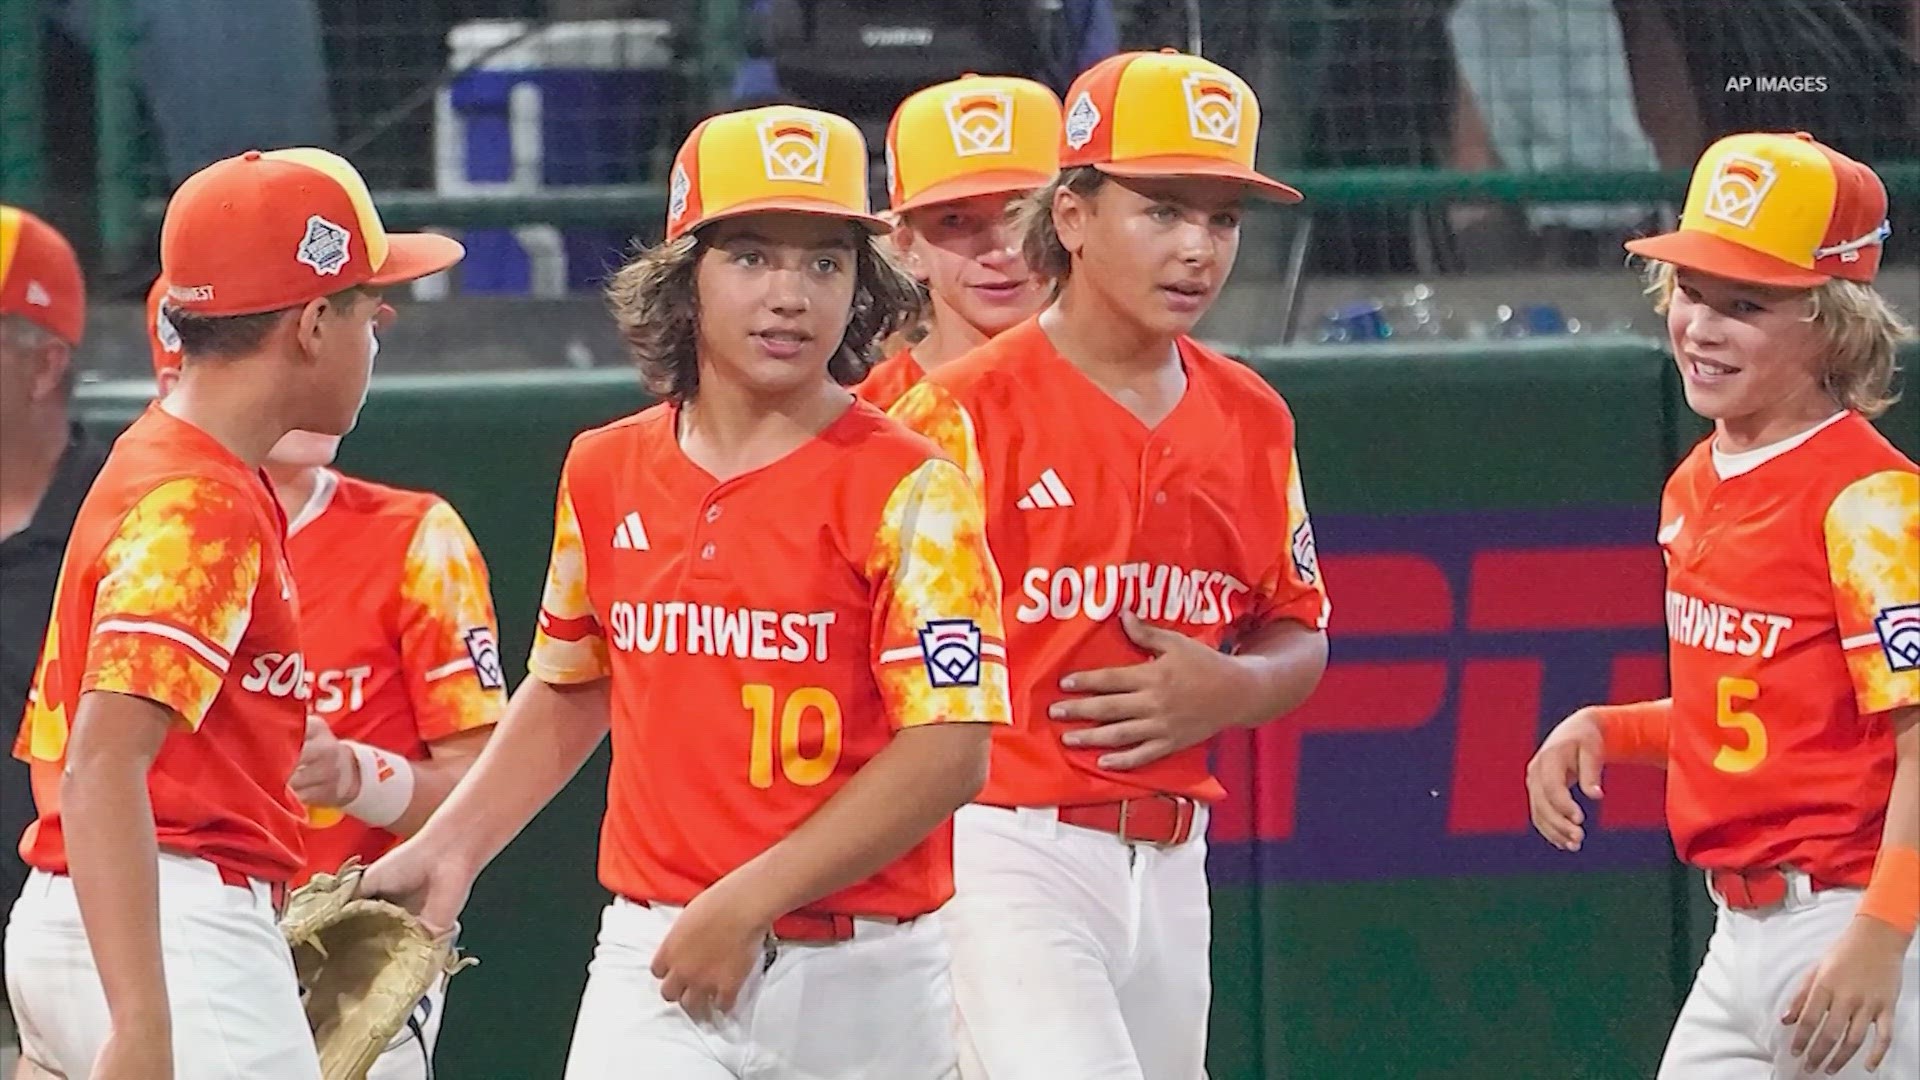 Meet the Pennsylvania team playing in the 2023 Little League World Series 